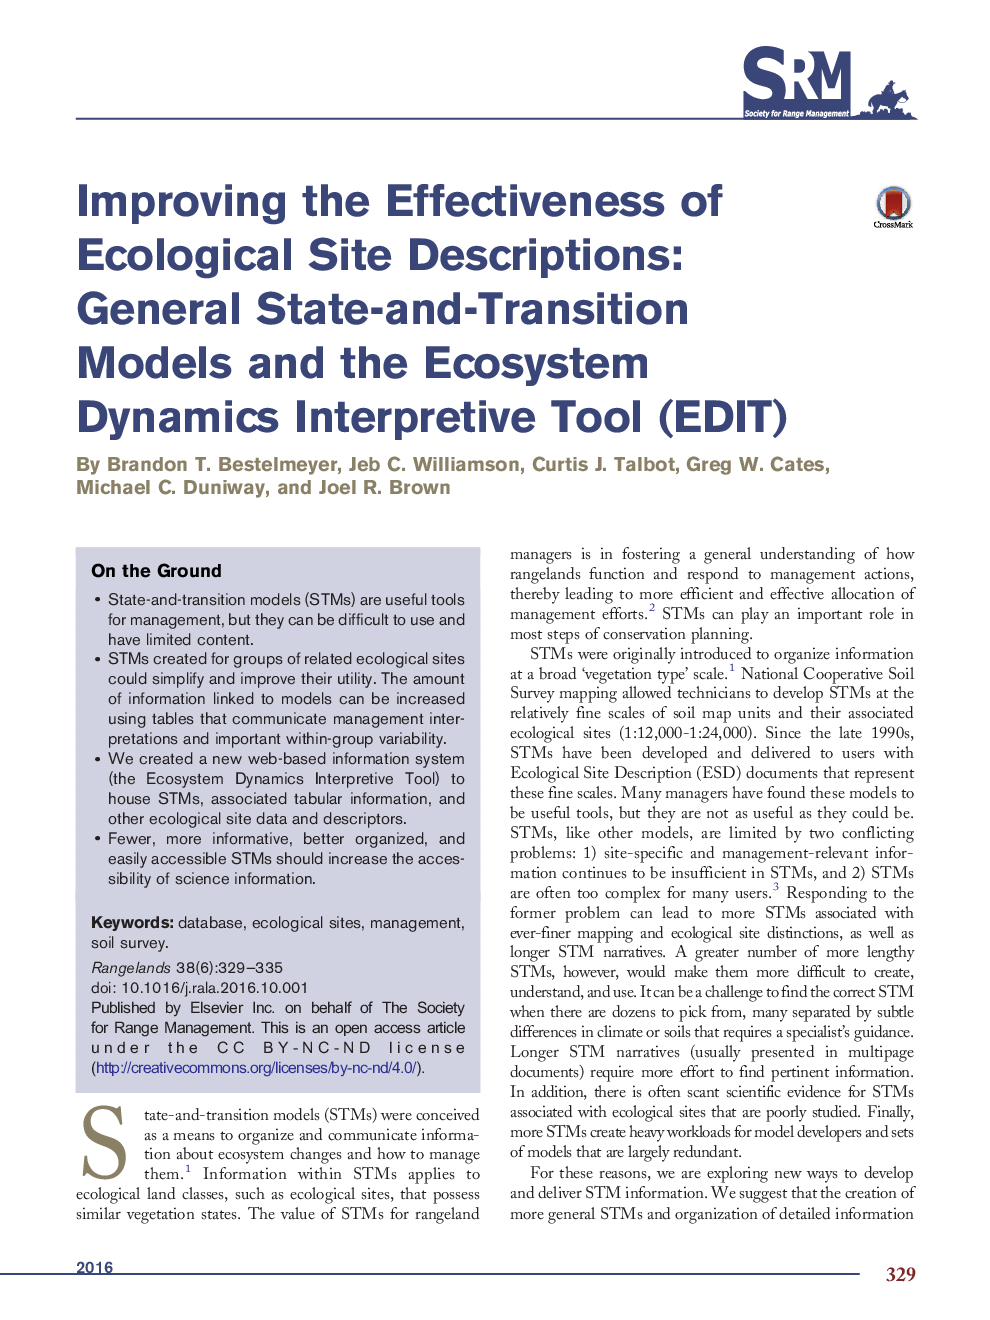 Improving the Effectiveness of Ecological Site Descriptions: General State-and-Transition Models and the Ecosystem Dynamics Interpretive Tool (EDIT)